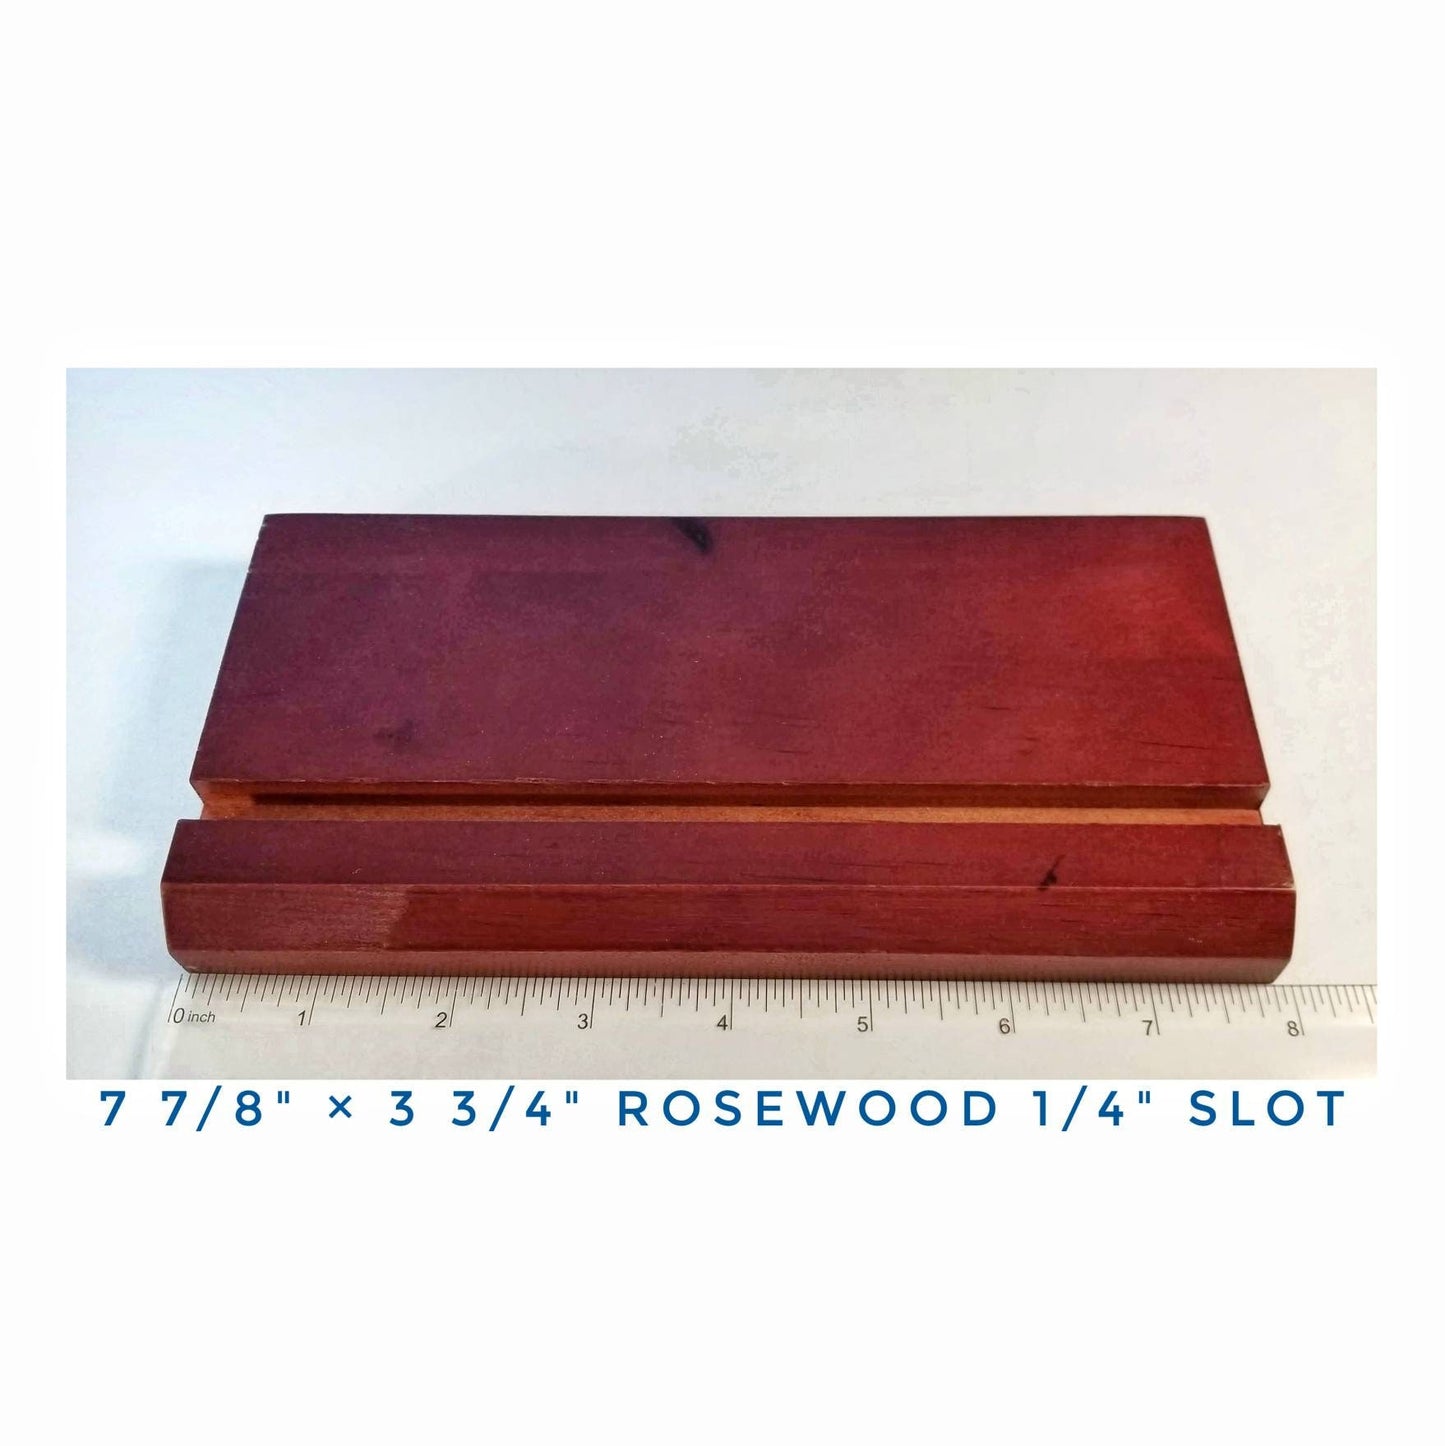 Rosewood display stand. Slotted for Fused glass artwork & stained glass. 8'' Name plate or sign holder. Paintable, cutable. Free shipping.